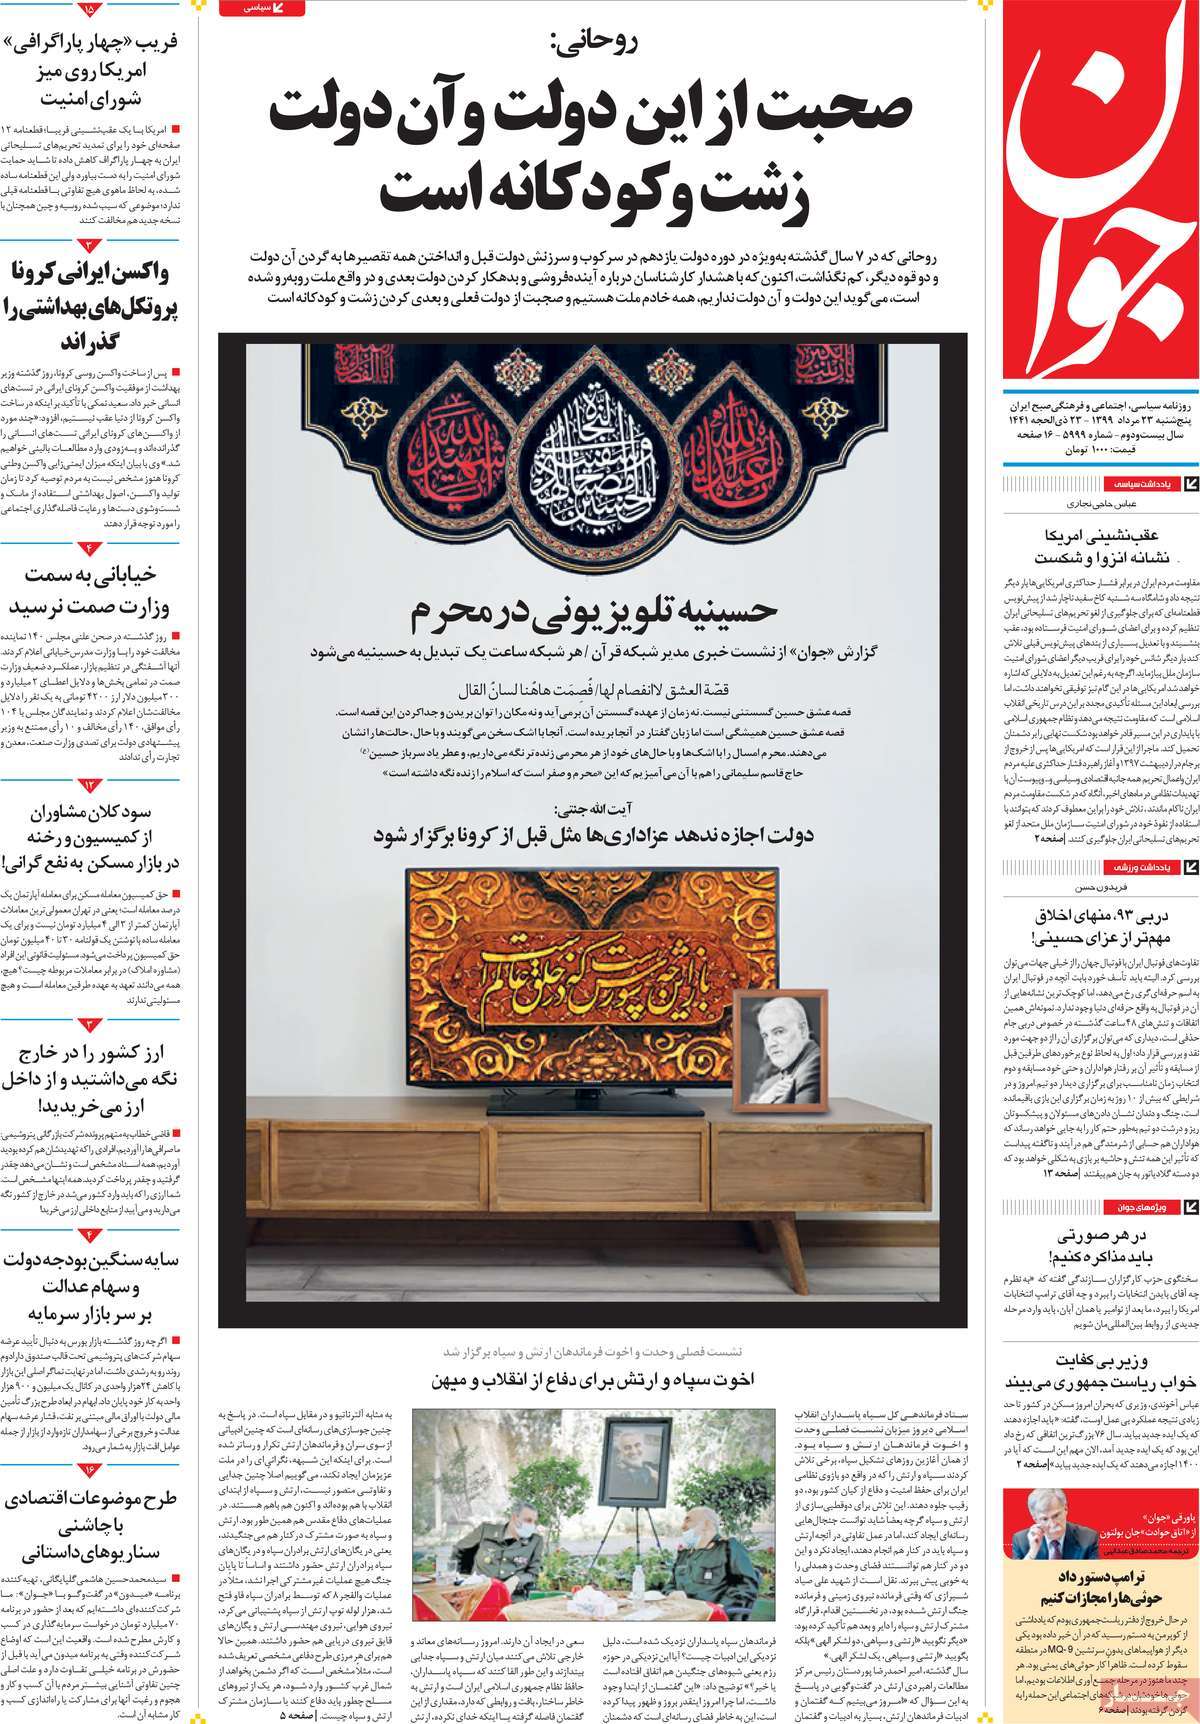 A Look at Iranian Newspaper Front Pages on August 13